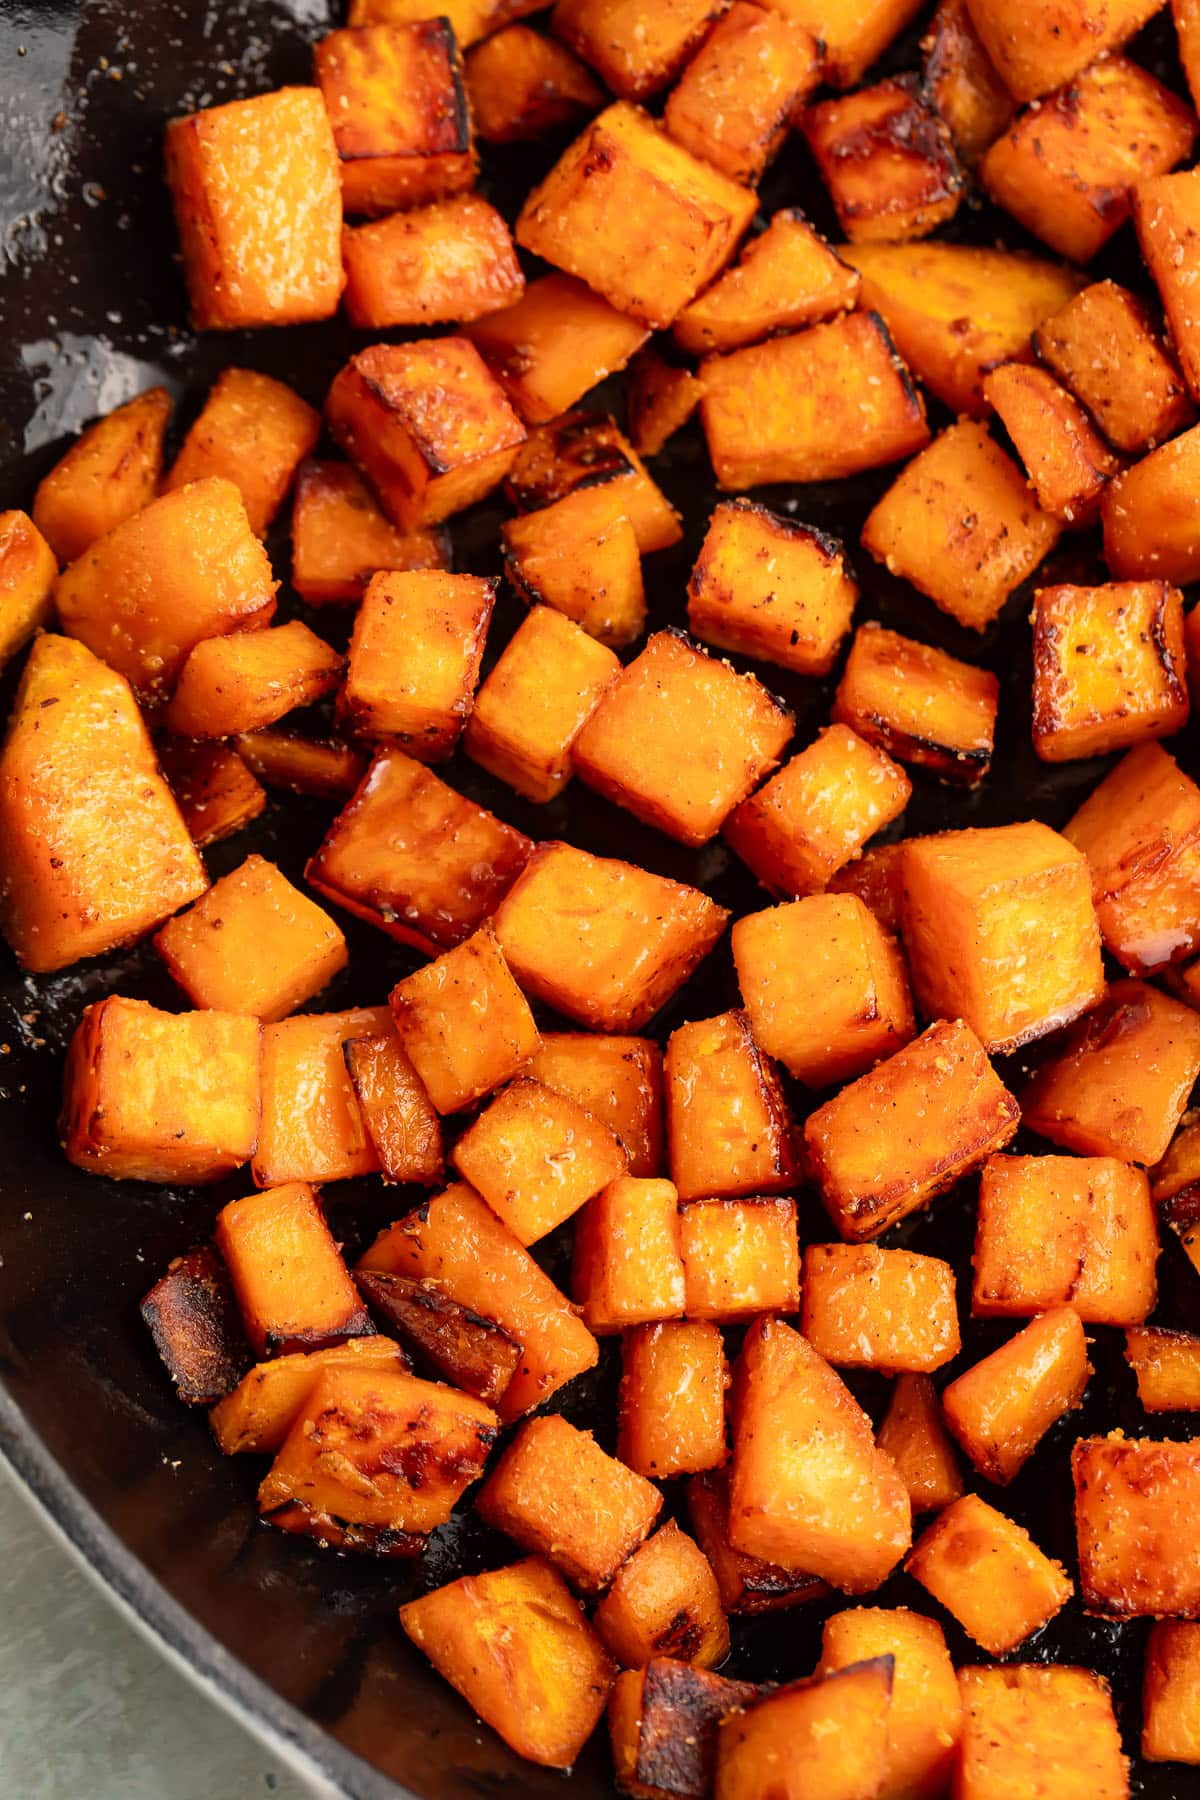 Sautéed sweet potatoes, cubed, in a large cast-iron skillet.